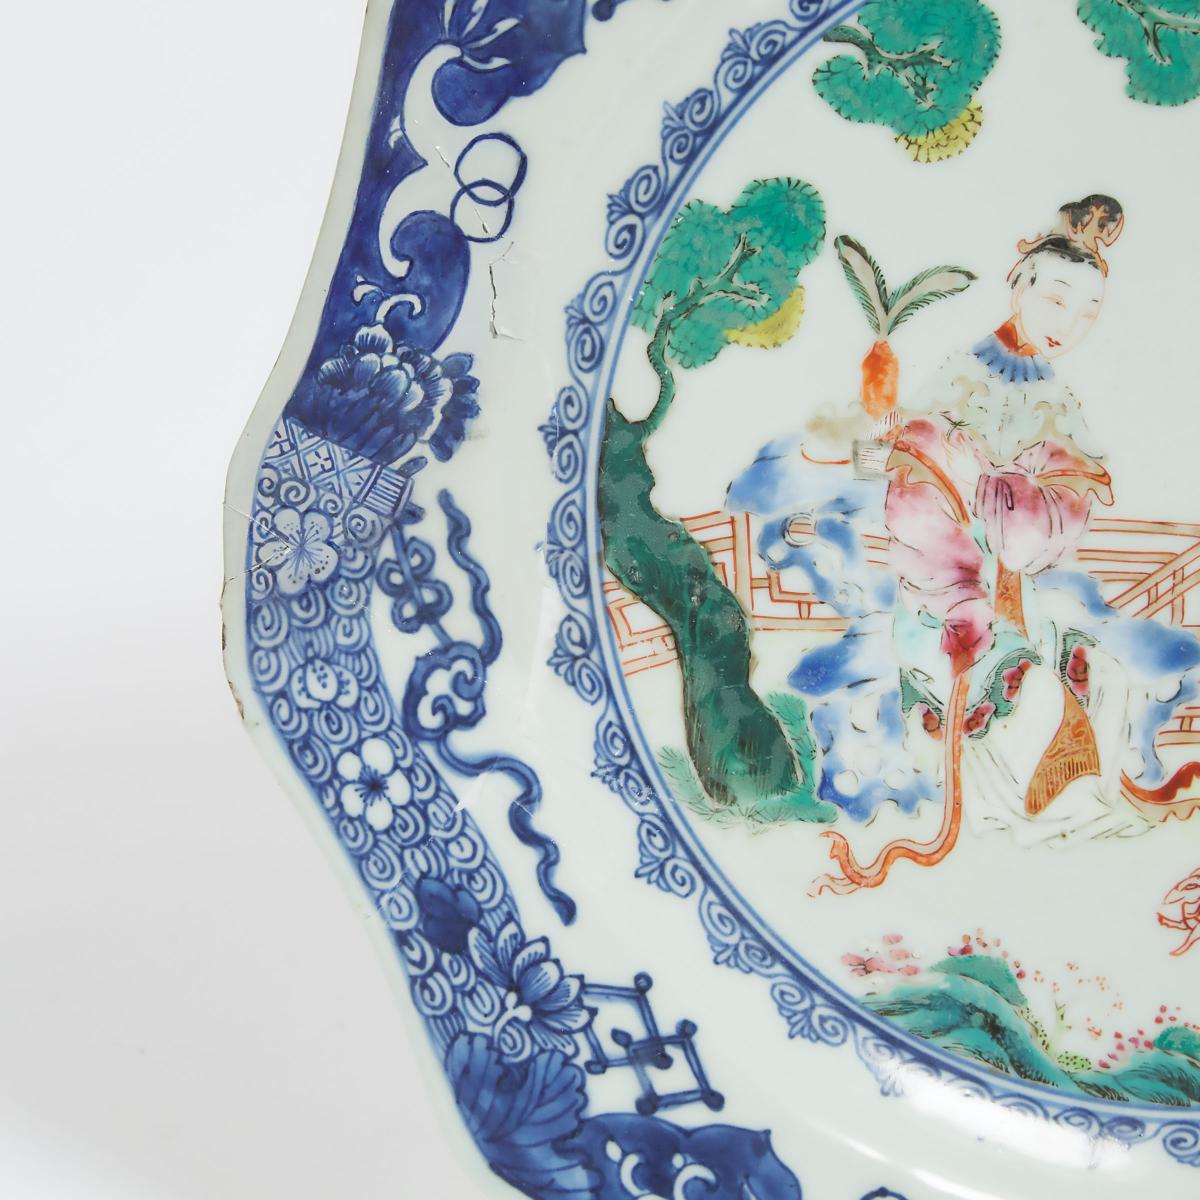 A Chinese Export Blue and White Famille Rose Plate, Late 18th Century, 十八世纪晚期 乾隆外销青花粉彩人物图盘, diameter - Image 2 of 4